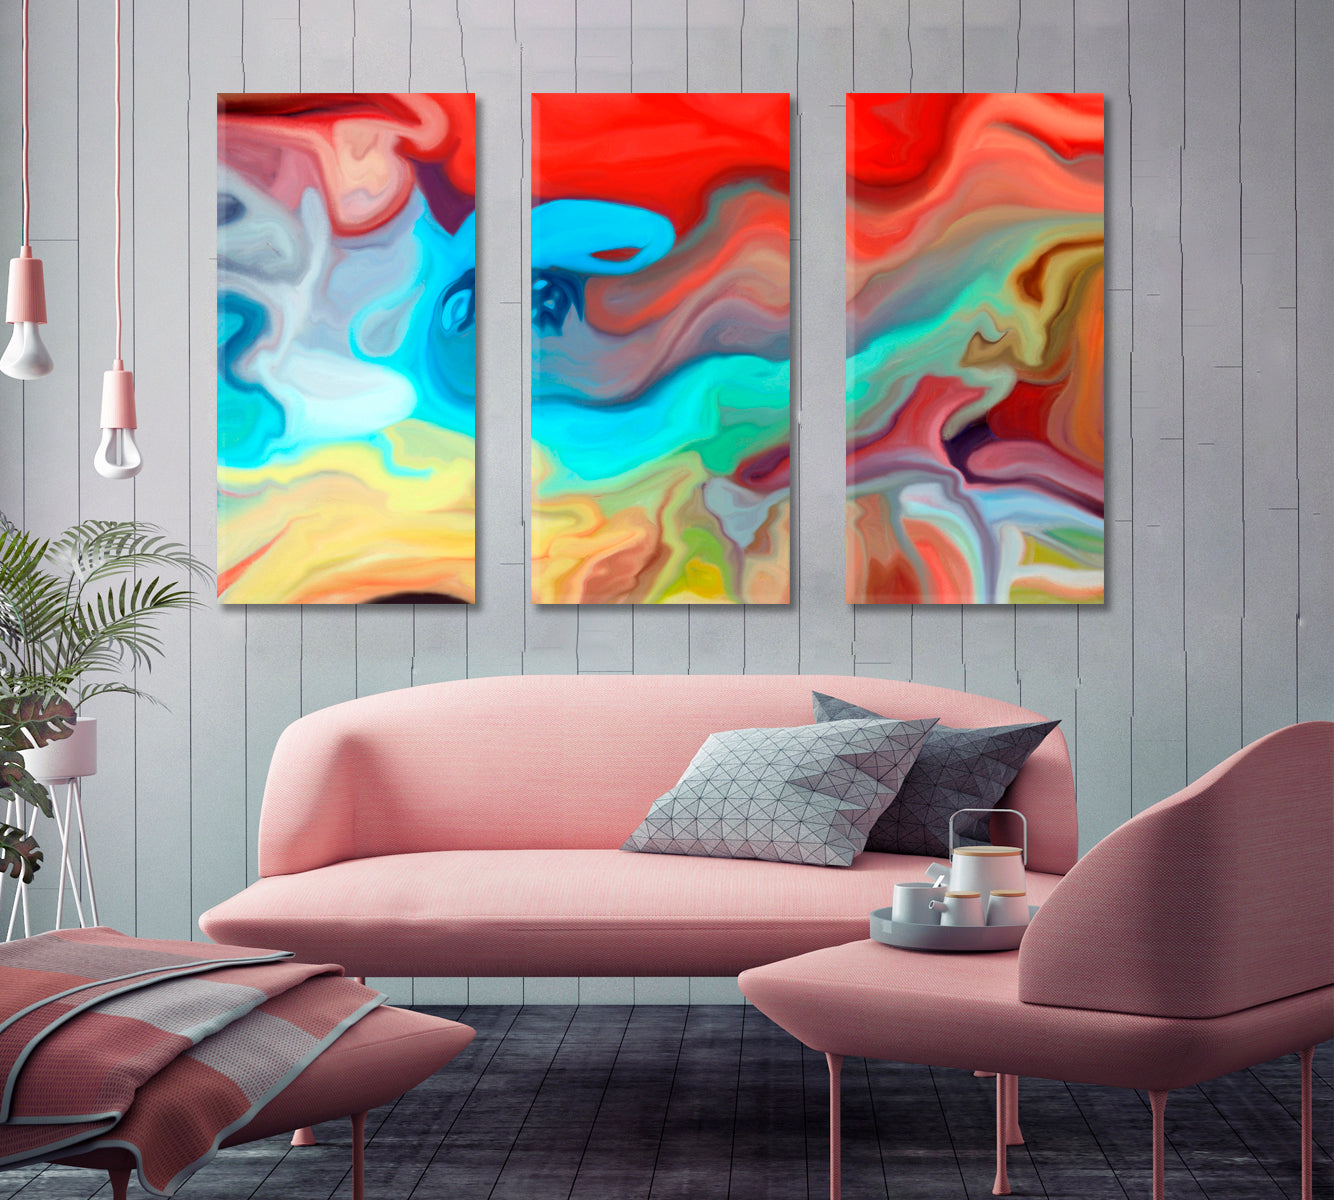 Modern Vivid Abstract Lines and Colors Abstract Art Print Artesty 3 panels 36" x 24" 